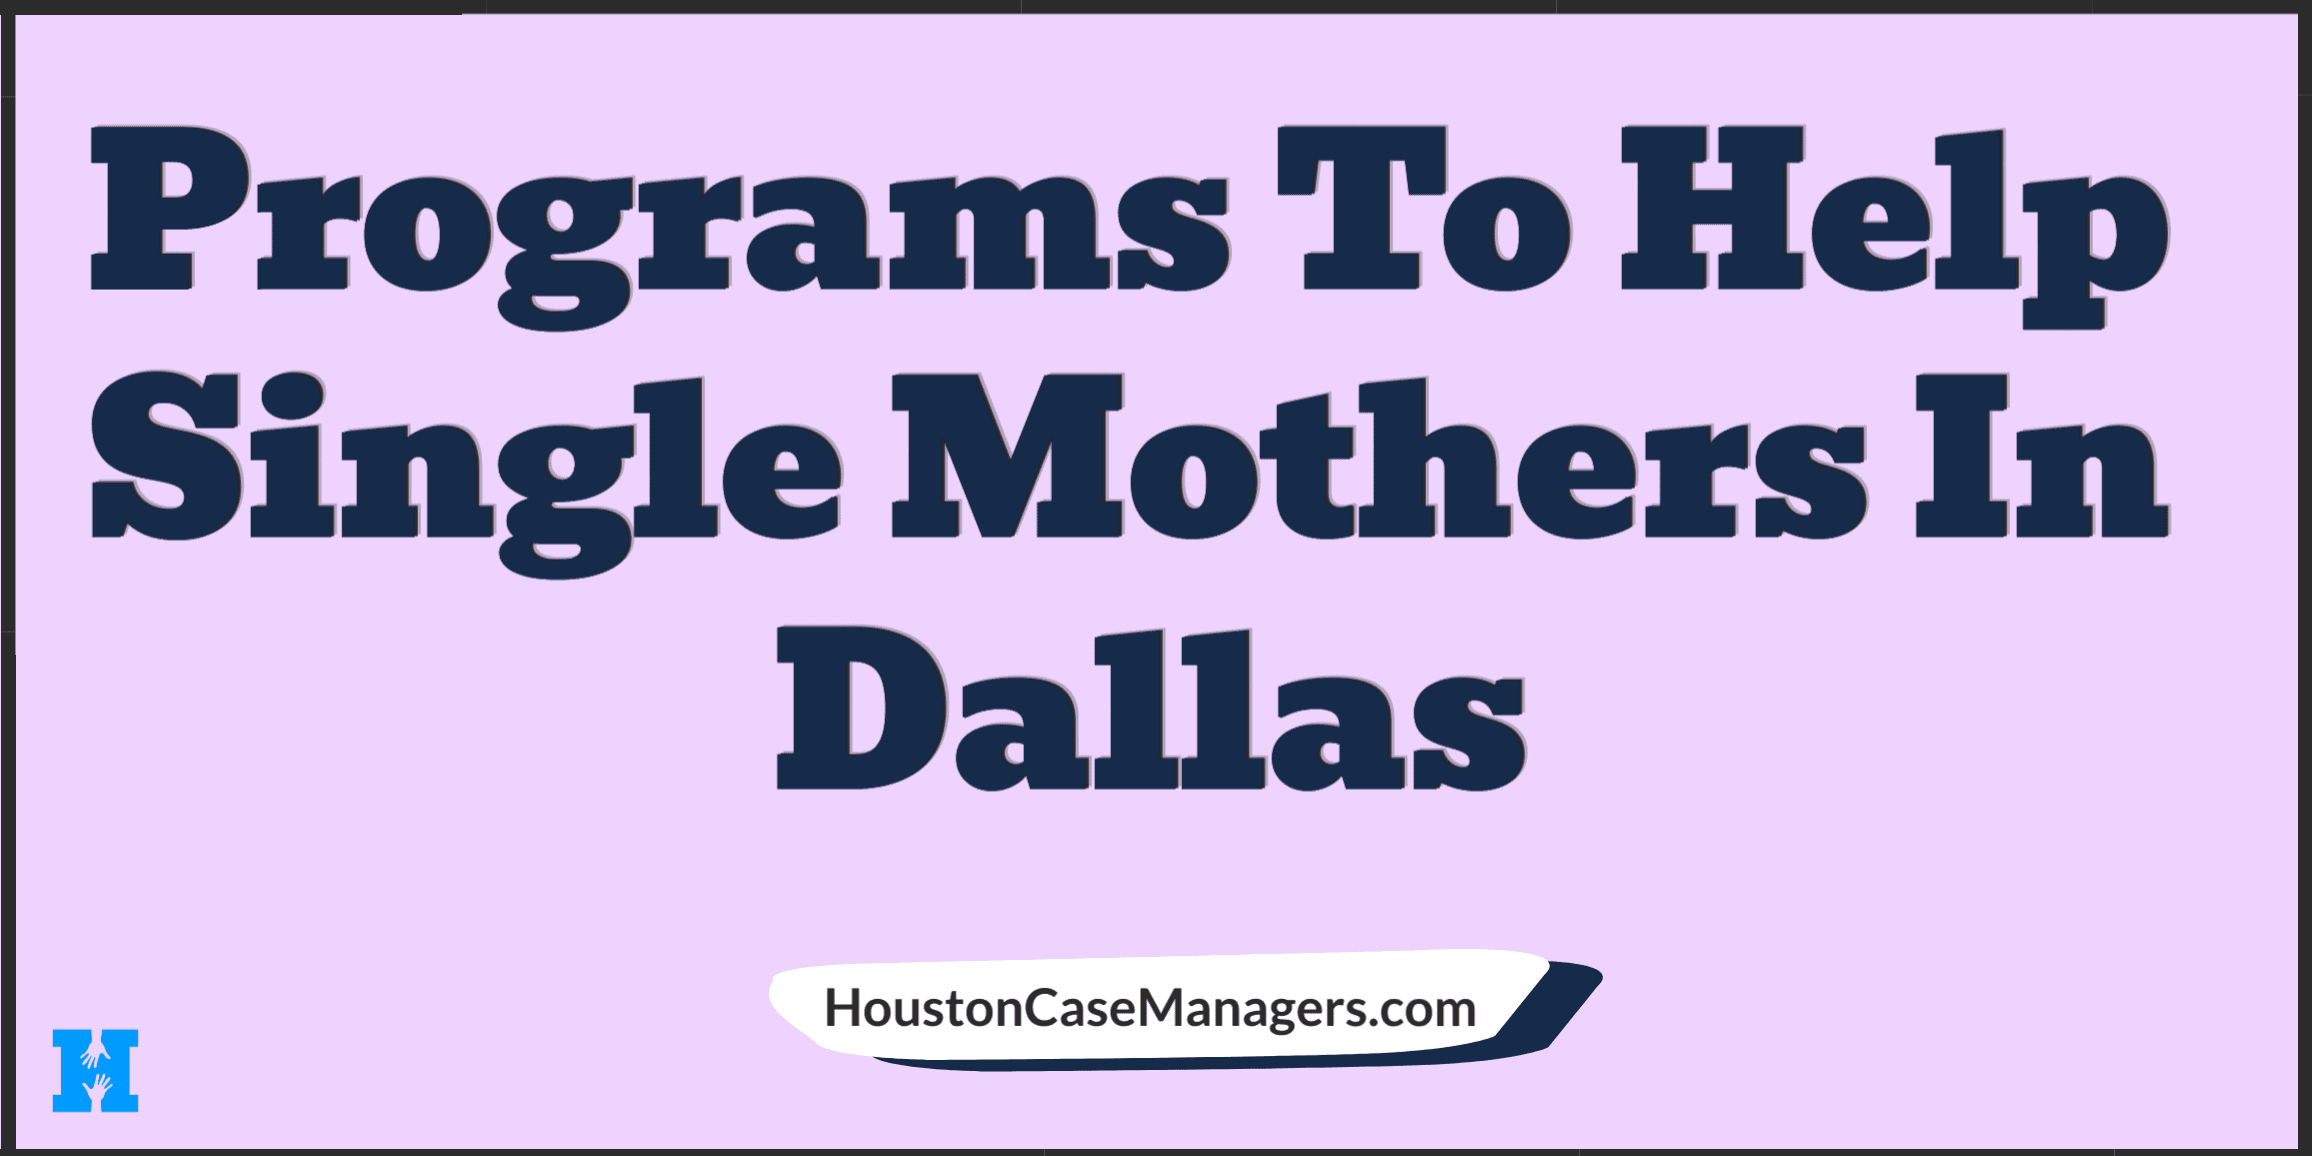 14 Programs To Help Single Mothers In Dallas